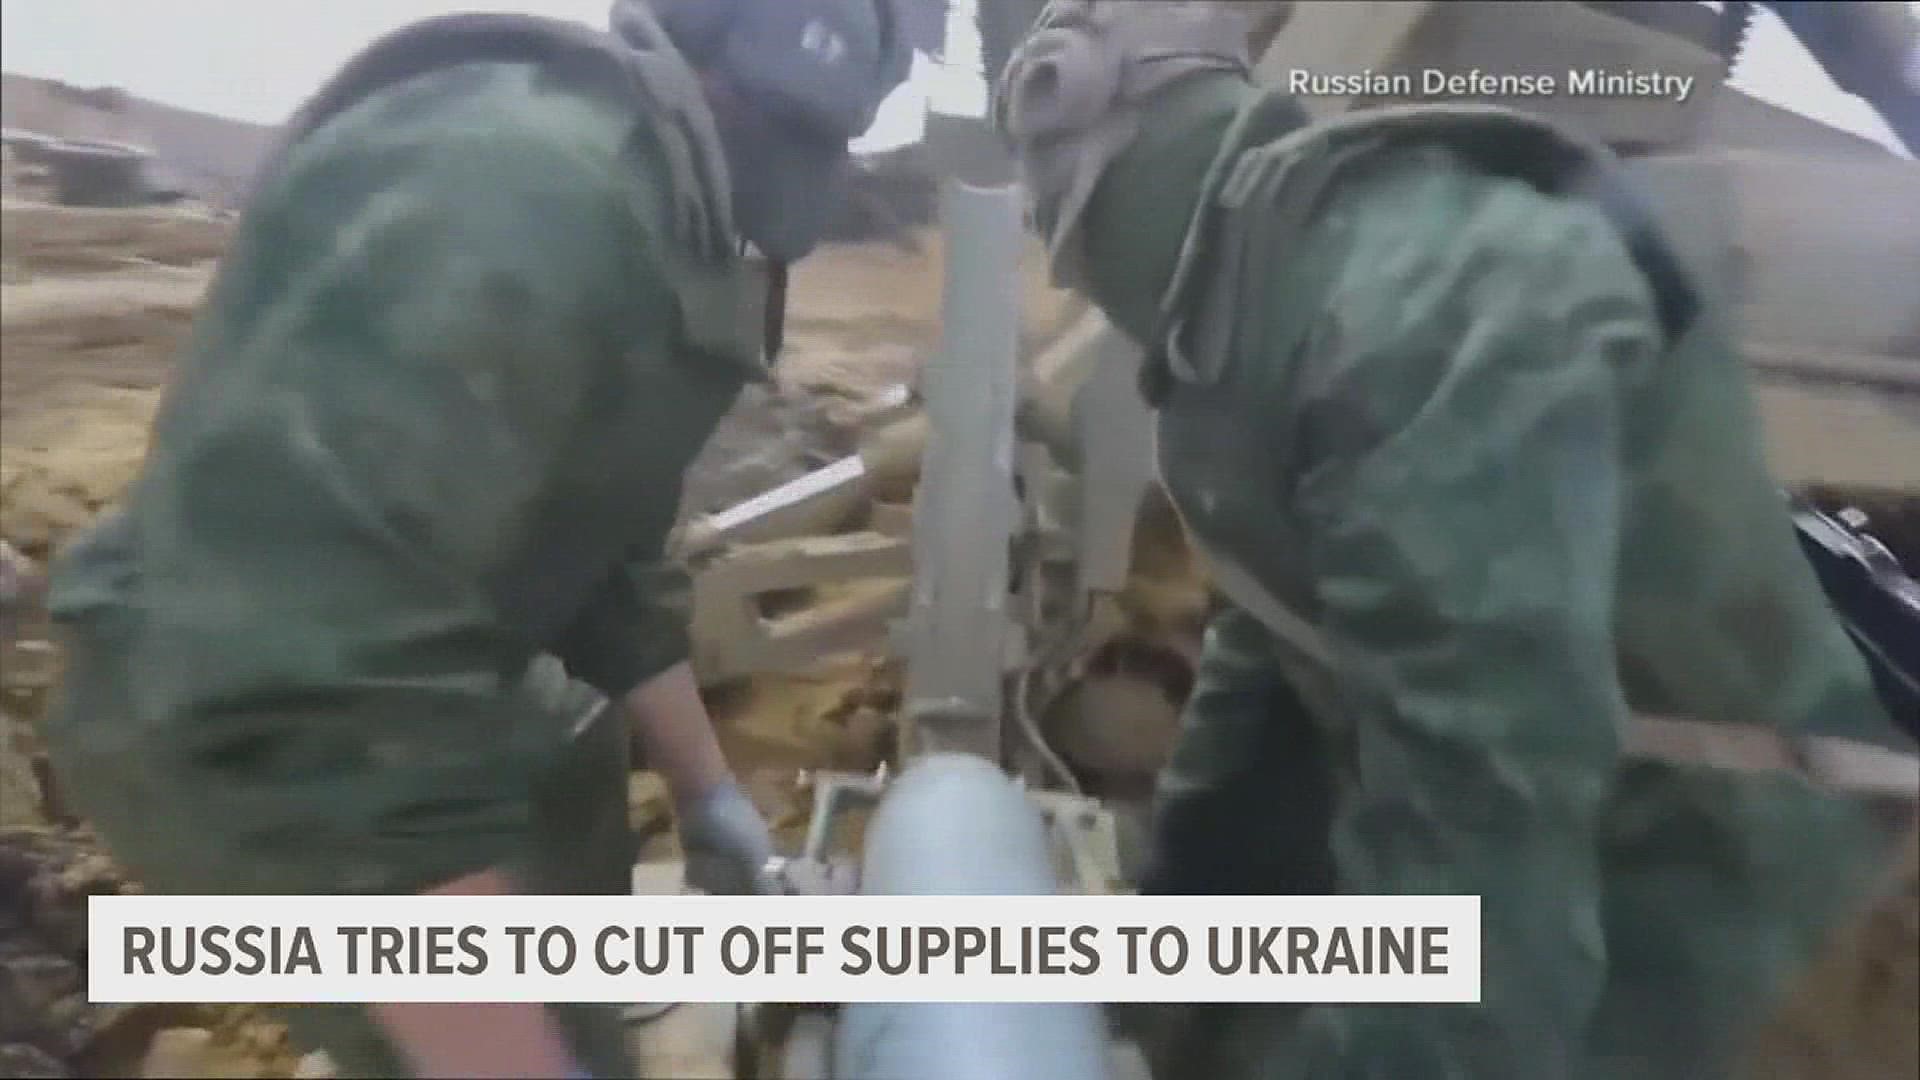 According to U.S. government officials, Russia's focus comes after a steady flow of supplies to help Ukrainian troops.